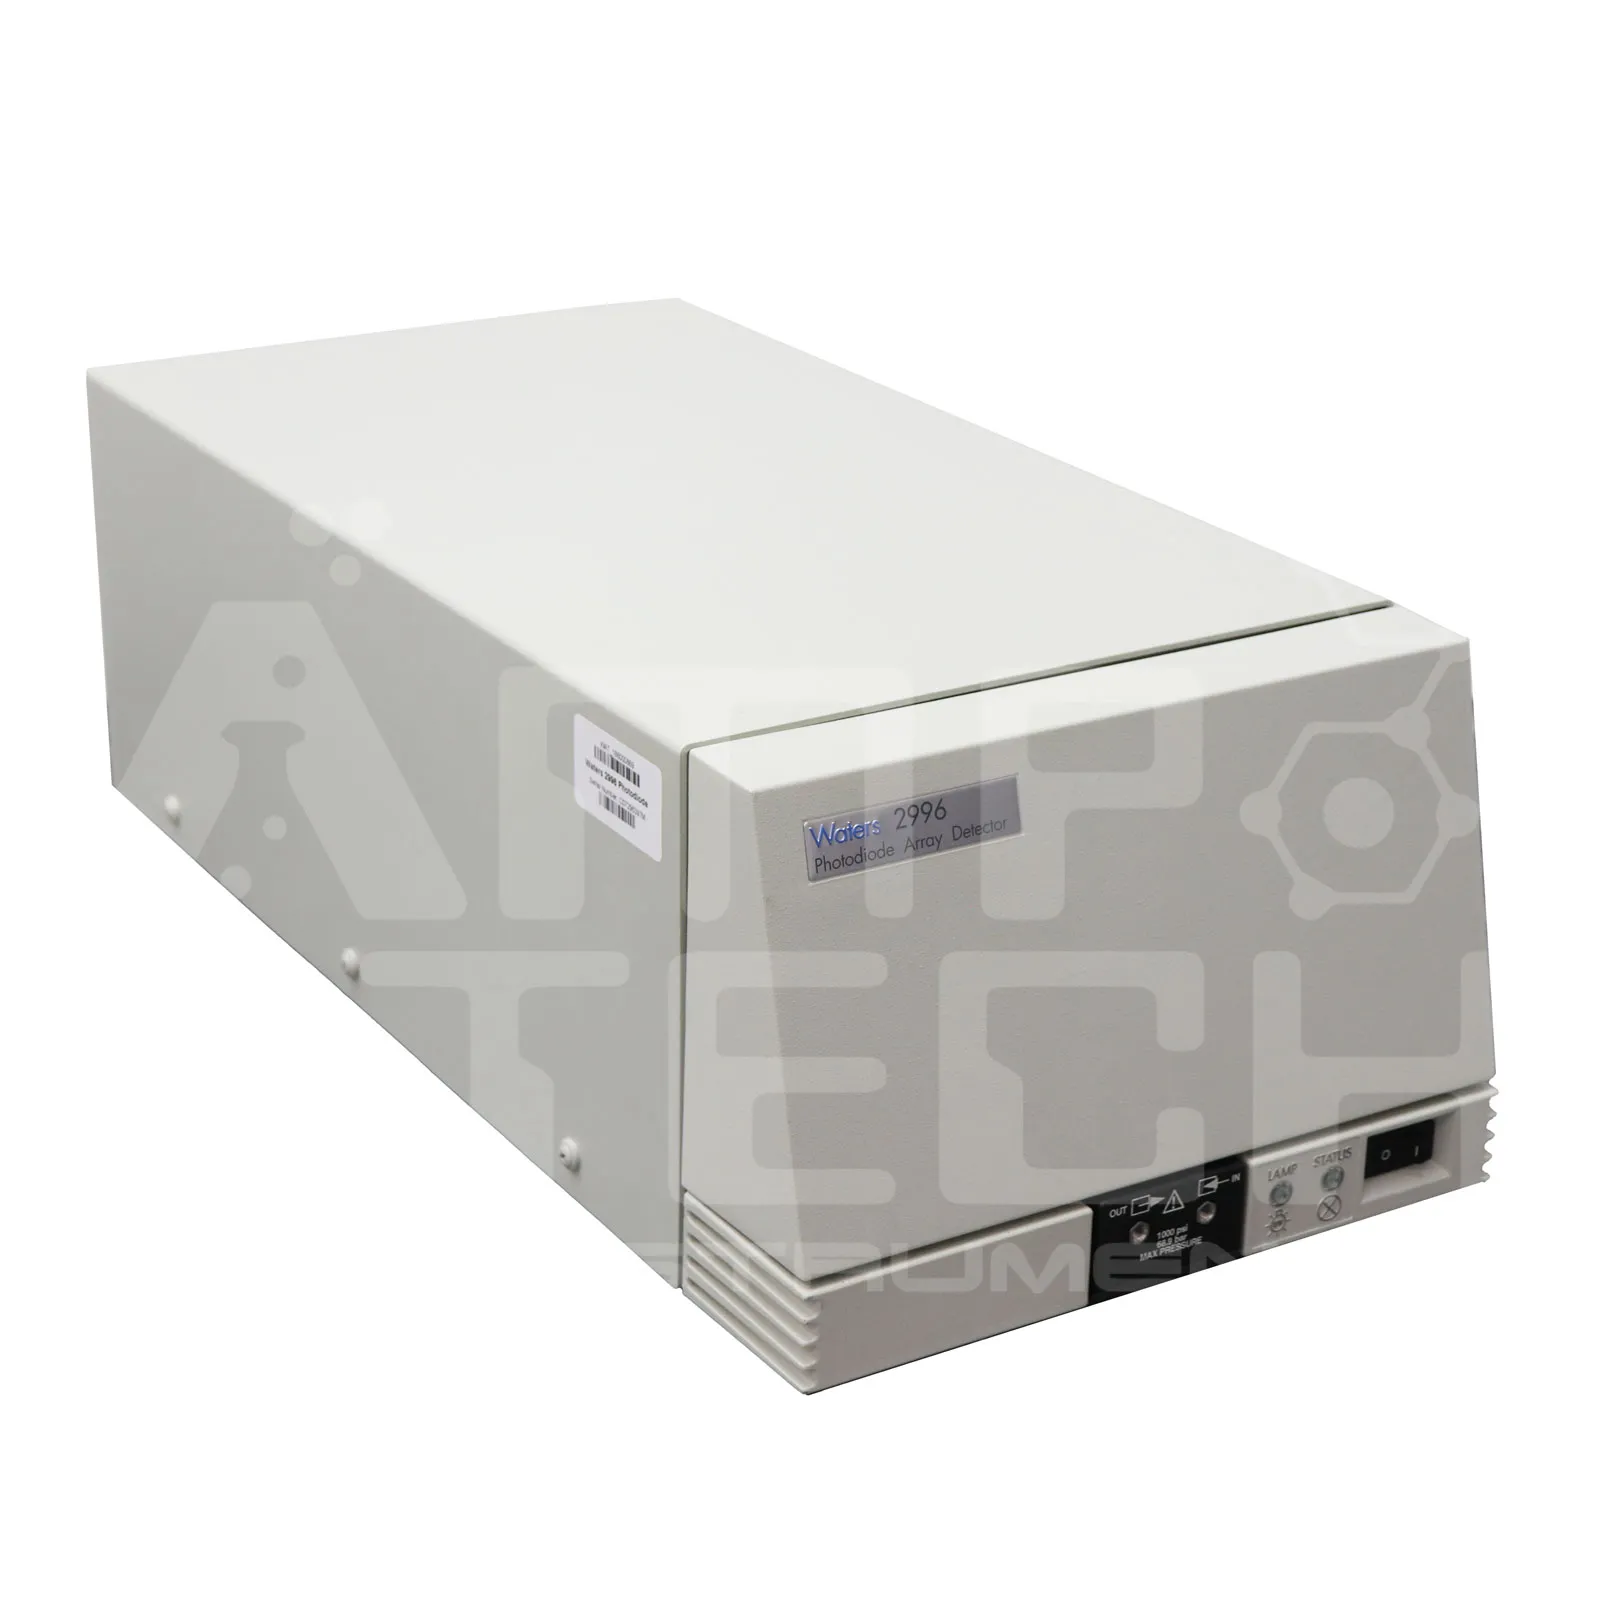 Waters 2996 HPLC PDA PhotoDiode Array Detector